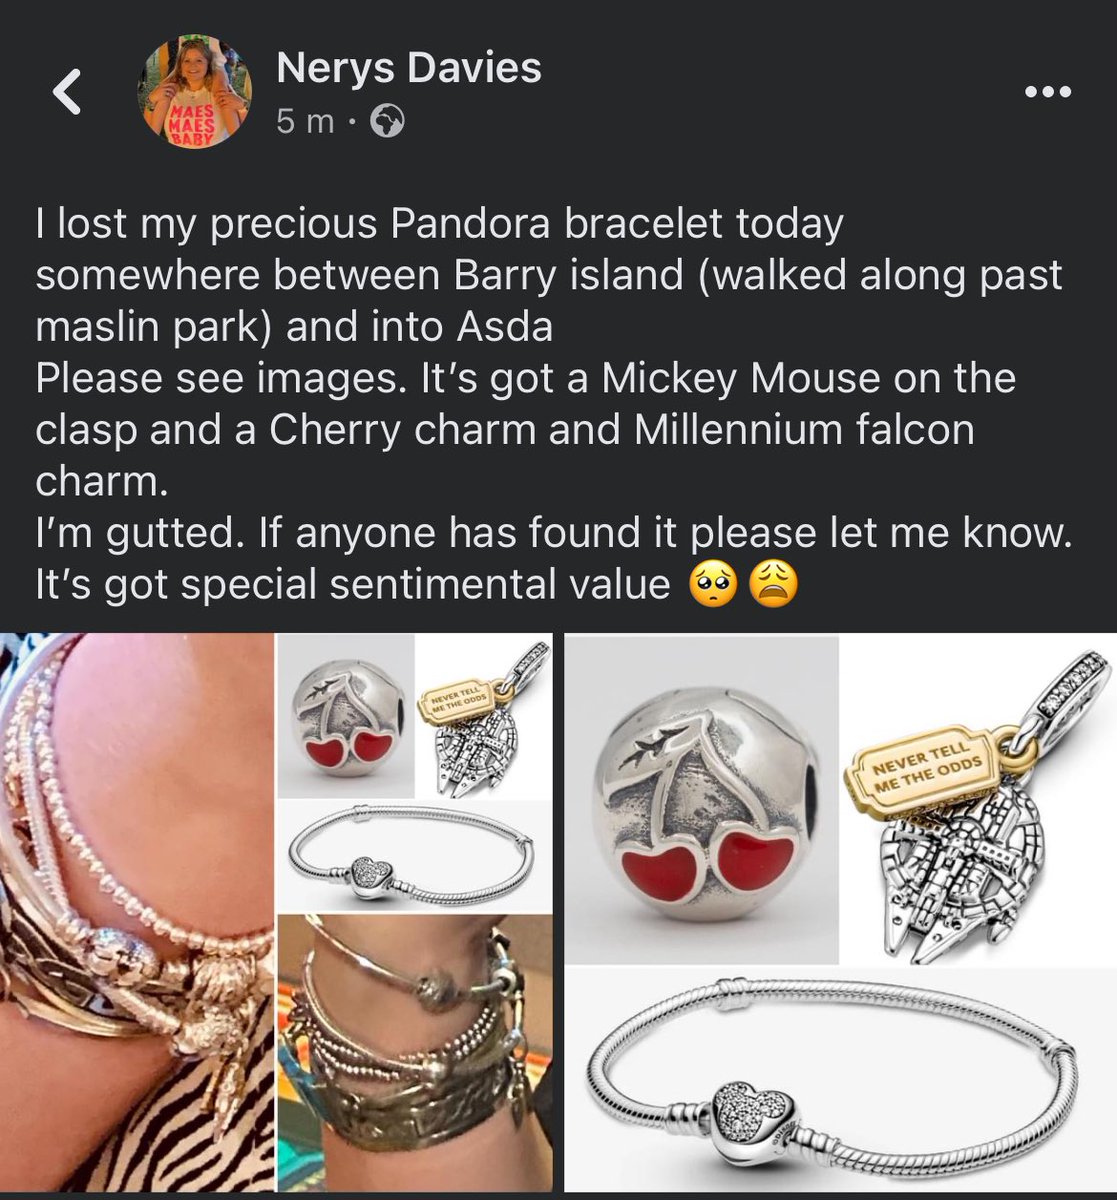 lost my precious Pandora bracelet today somewhere along Barry island (walked past maslin park) & Asda Please see images It’s got a Mickey Mouse on the clasp & Cherry charm & Millennium falcon charm gutted. If anyone found it please let me know It’s got special sentimental value😩